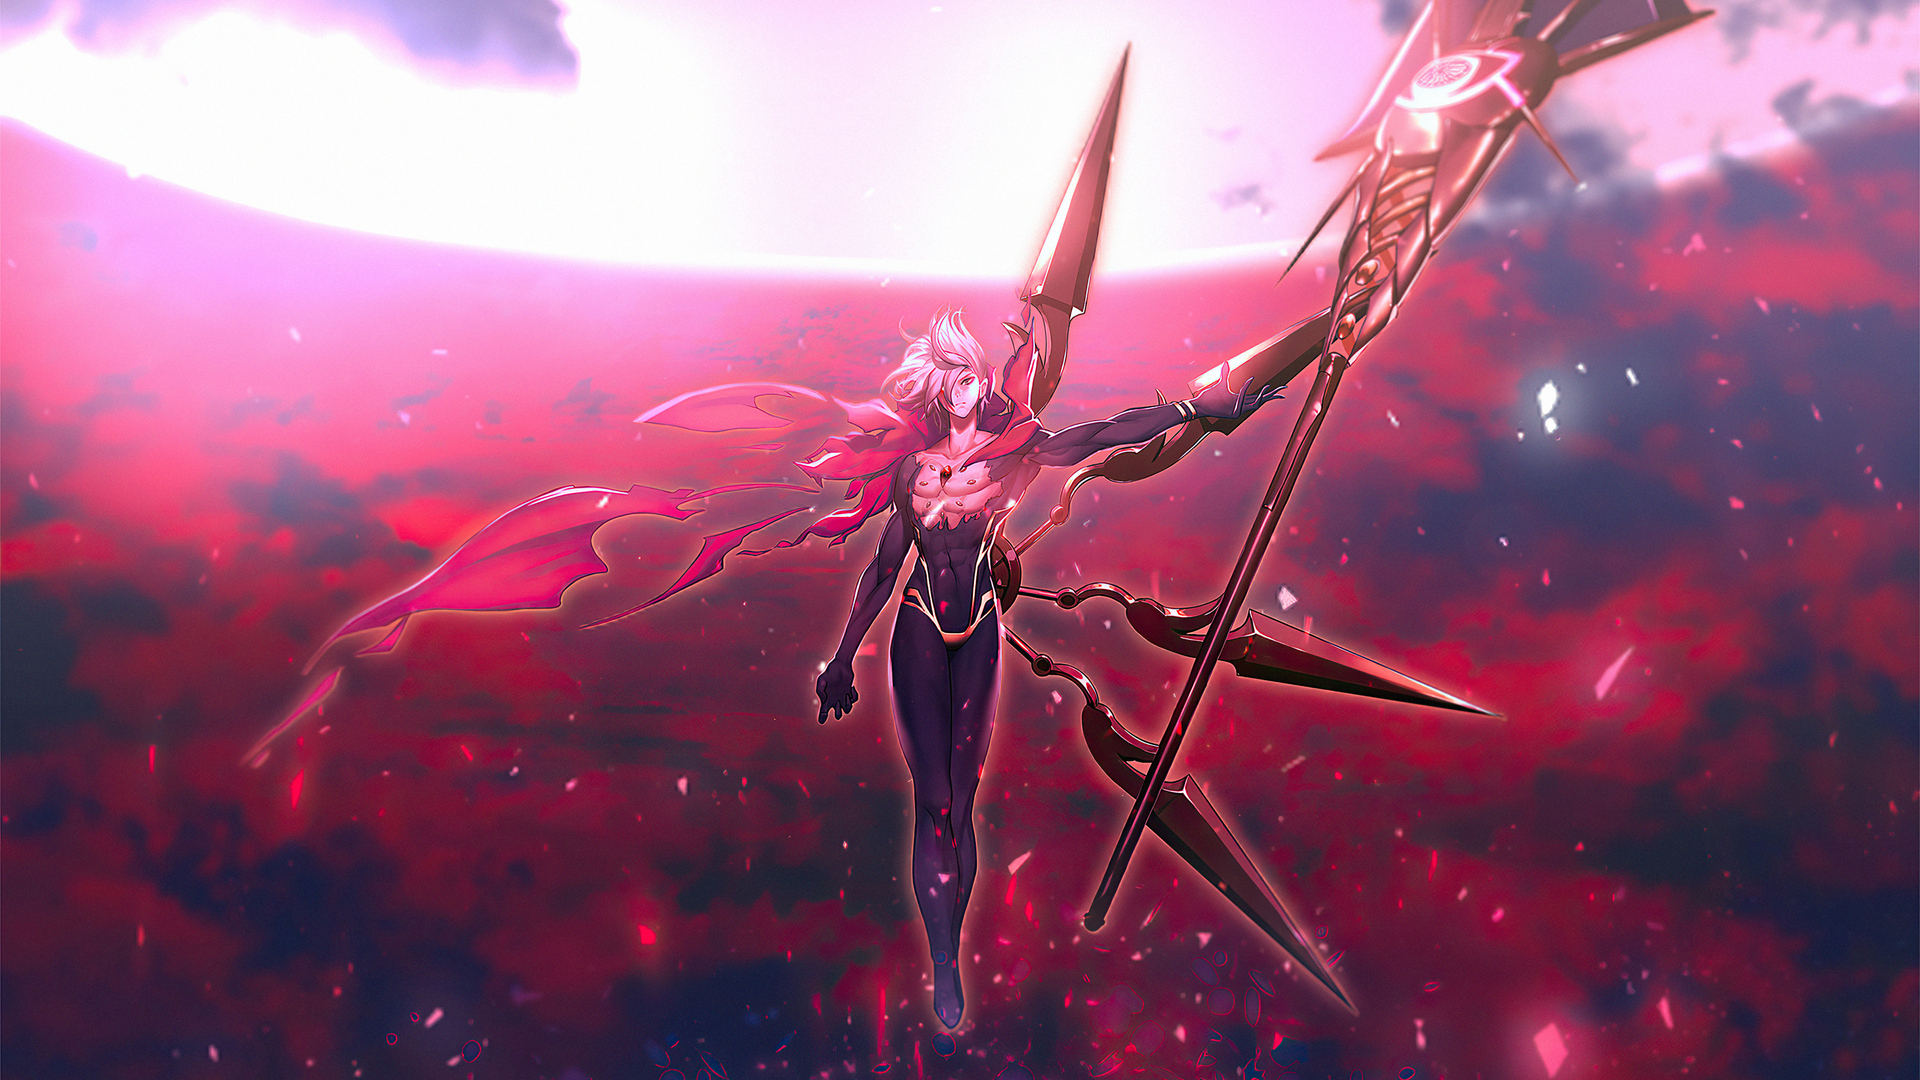 19x1080 Karna Fate Grand Order 4k Laptop Full Hd 1080p Hd 4k Wallpapers Images Backgrounds Photos And Pictures